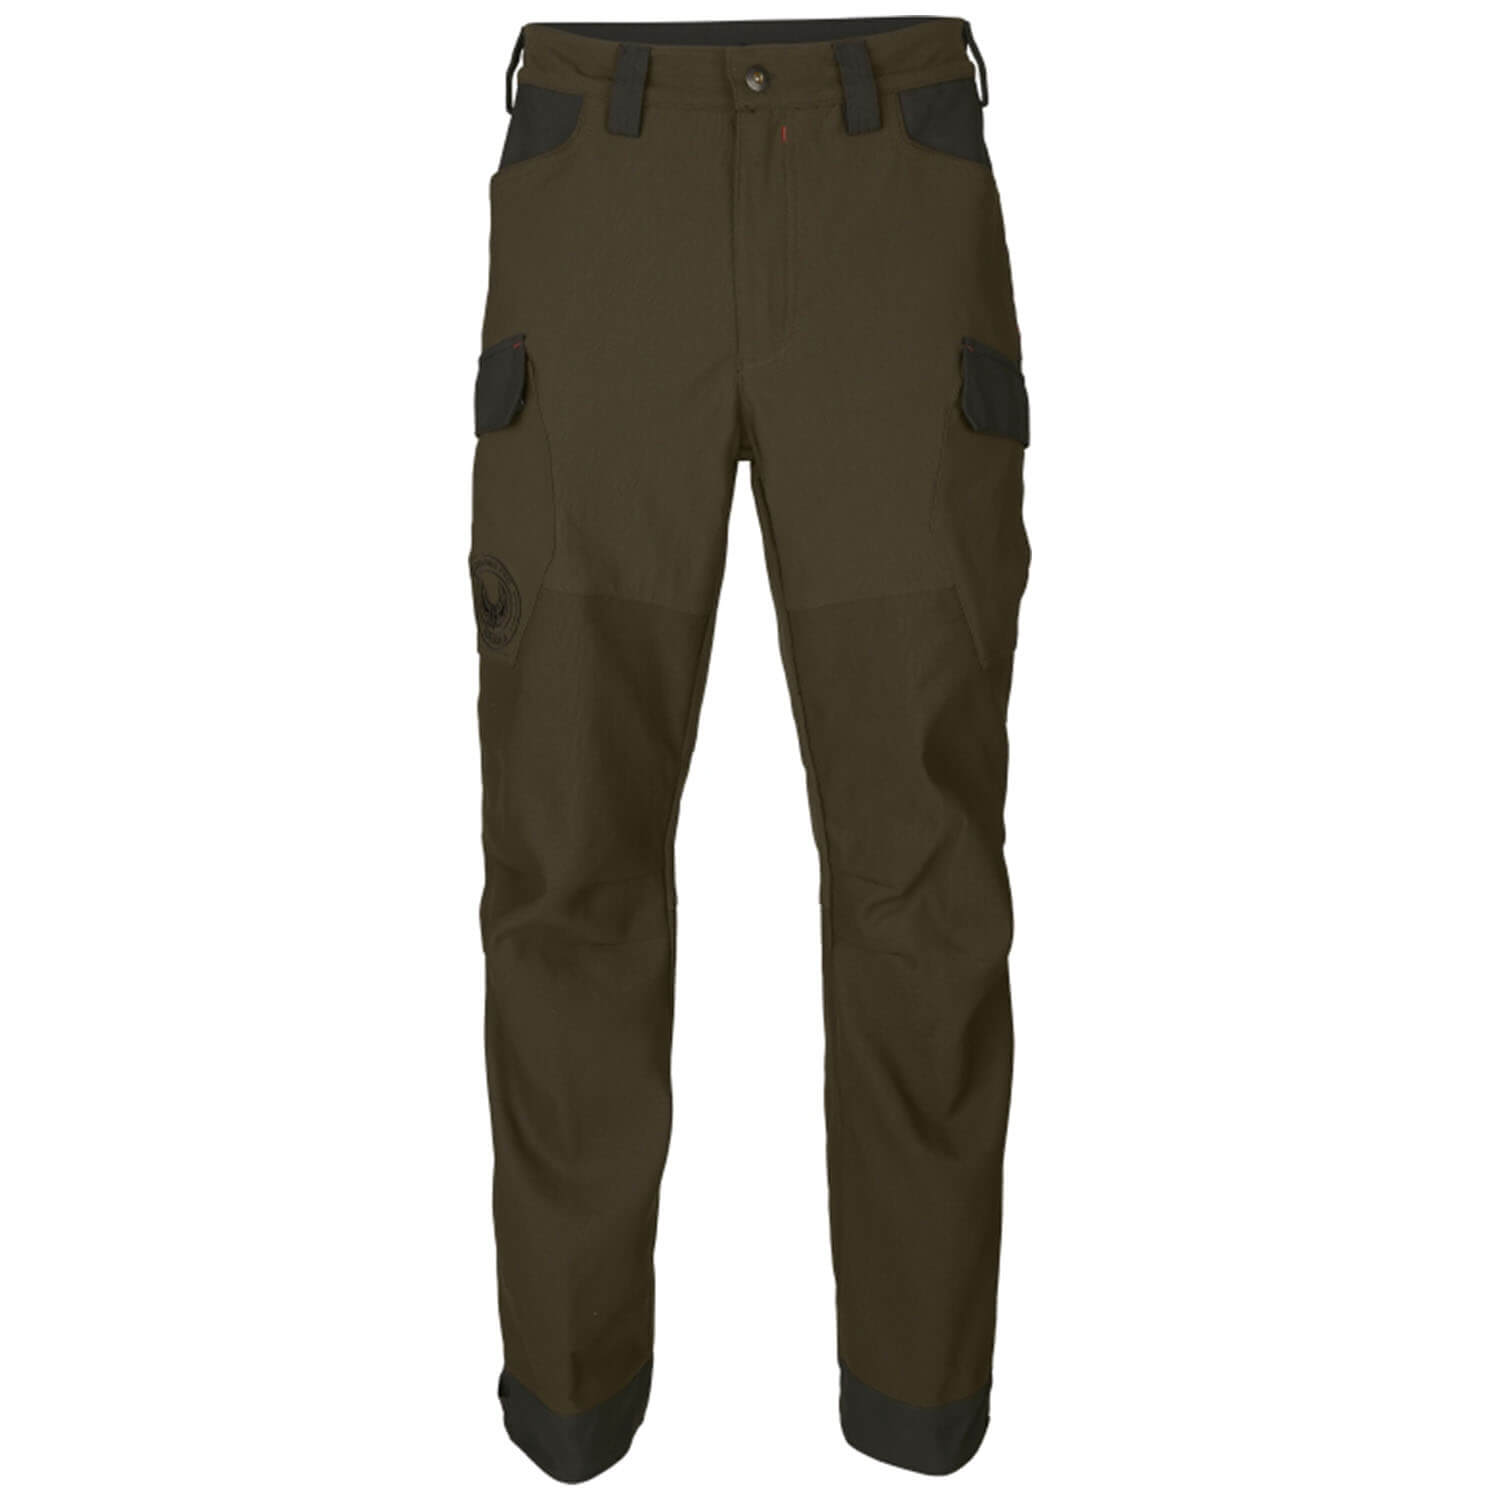 Härkila hunting trousers Wildboar Pro Move (willow green) - Hunting Trousers